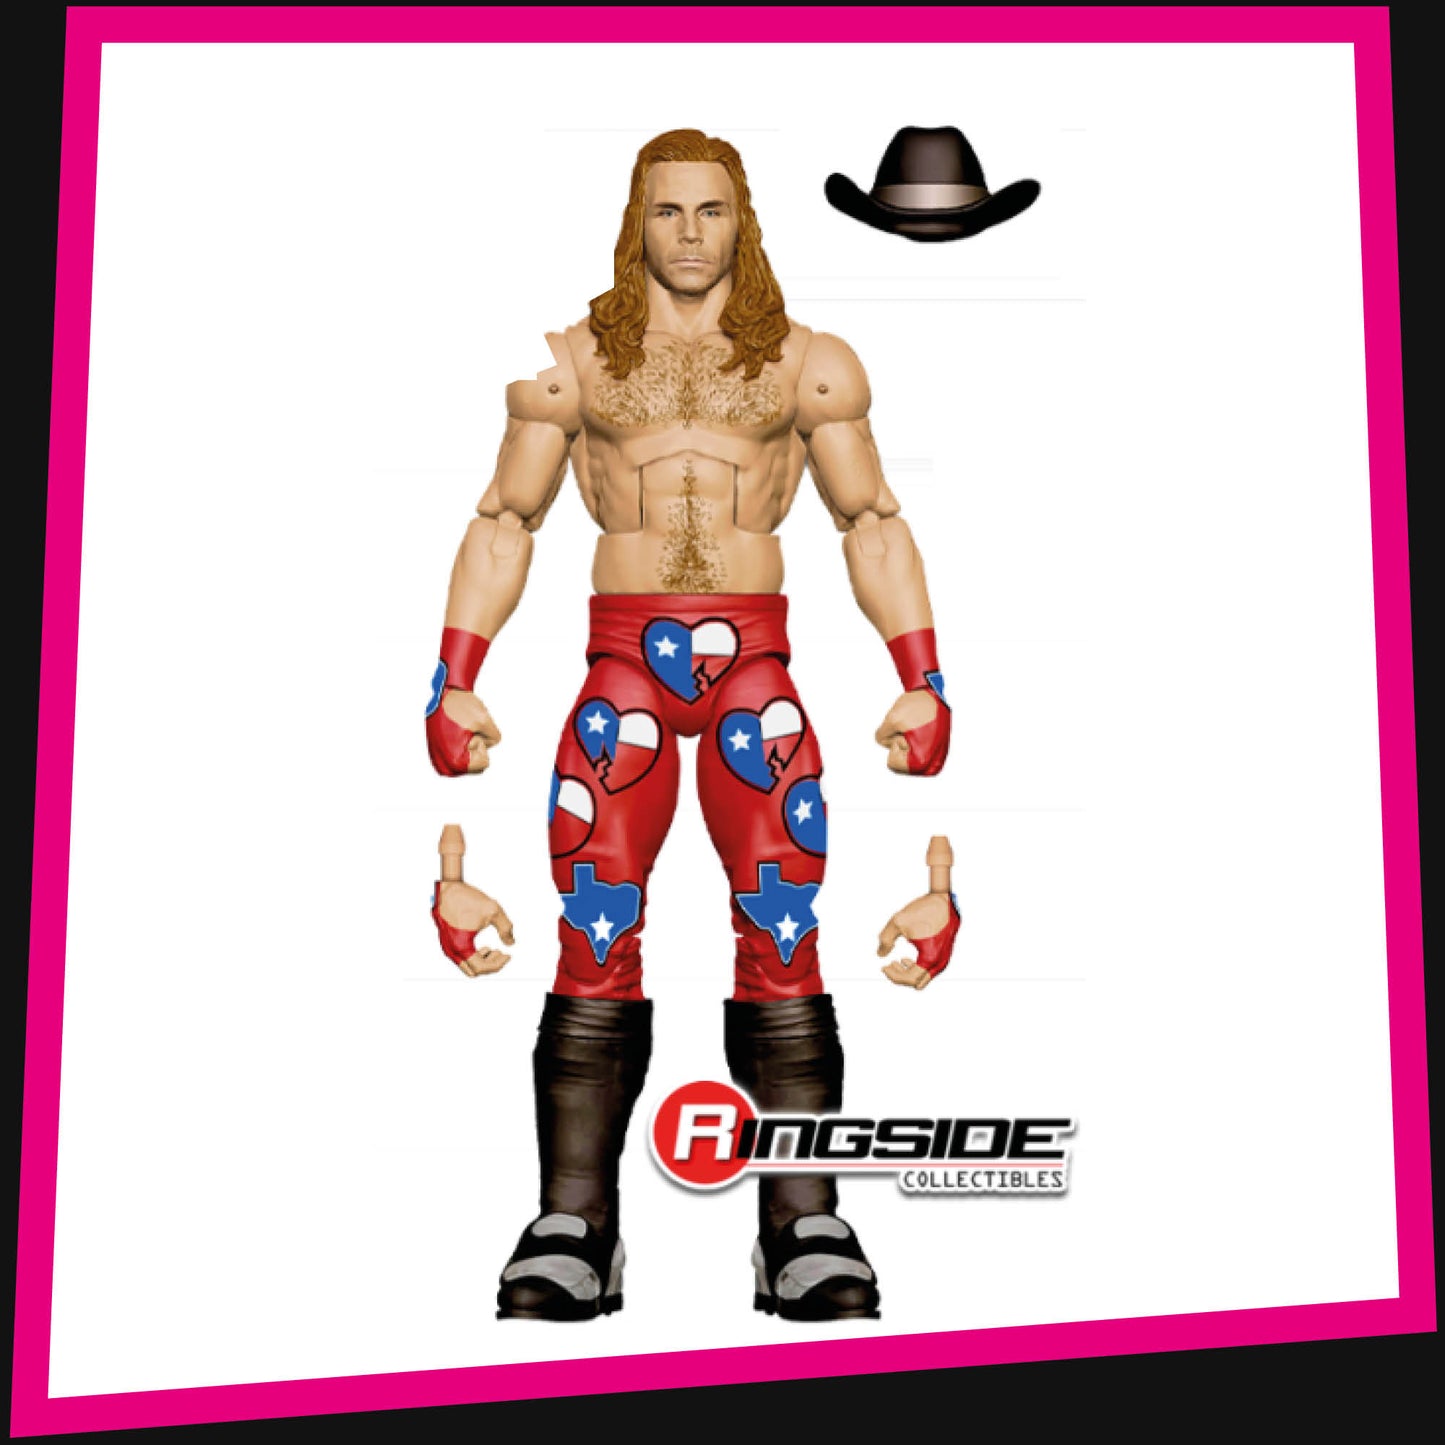 Defining Moments 4-Pack (Shawn Michaels, Mankind, Cody Rhodes, Bret Hart) - Ringside Collectibles Exclusive WWE Mattel